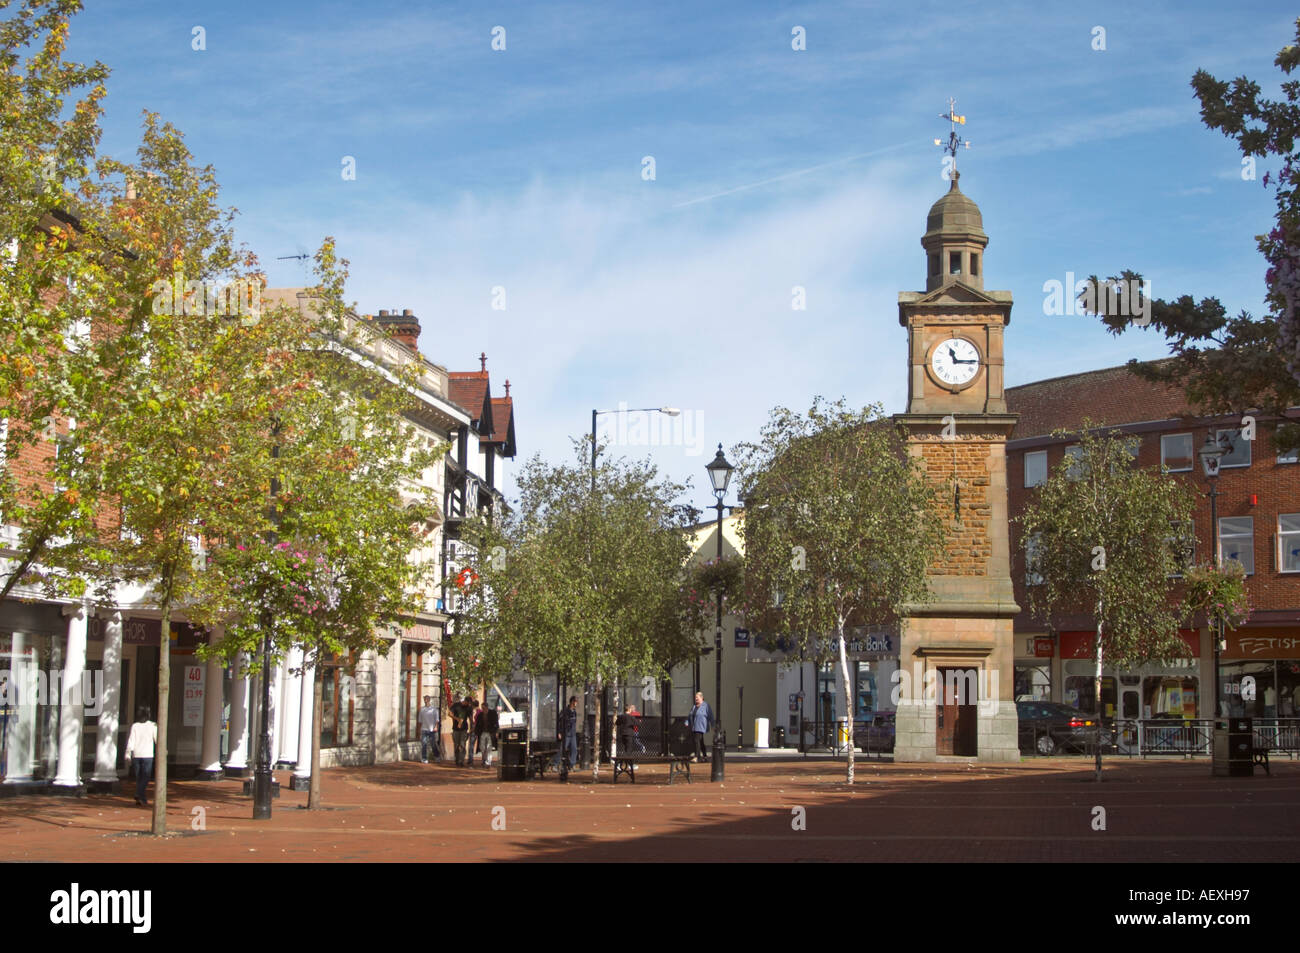 The Clock Tower Rugby Town Centre UK Stock Photo: 4495766 - Alamy